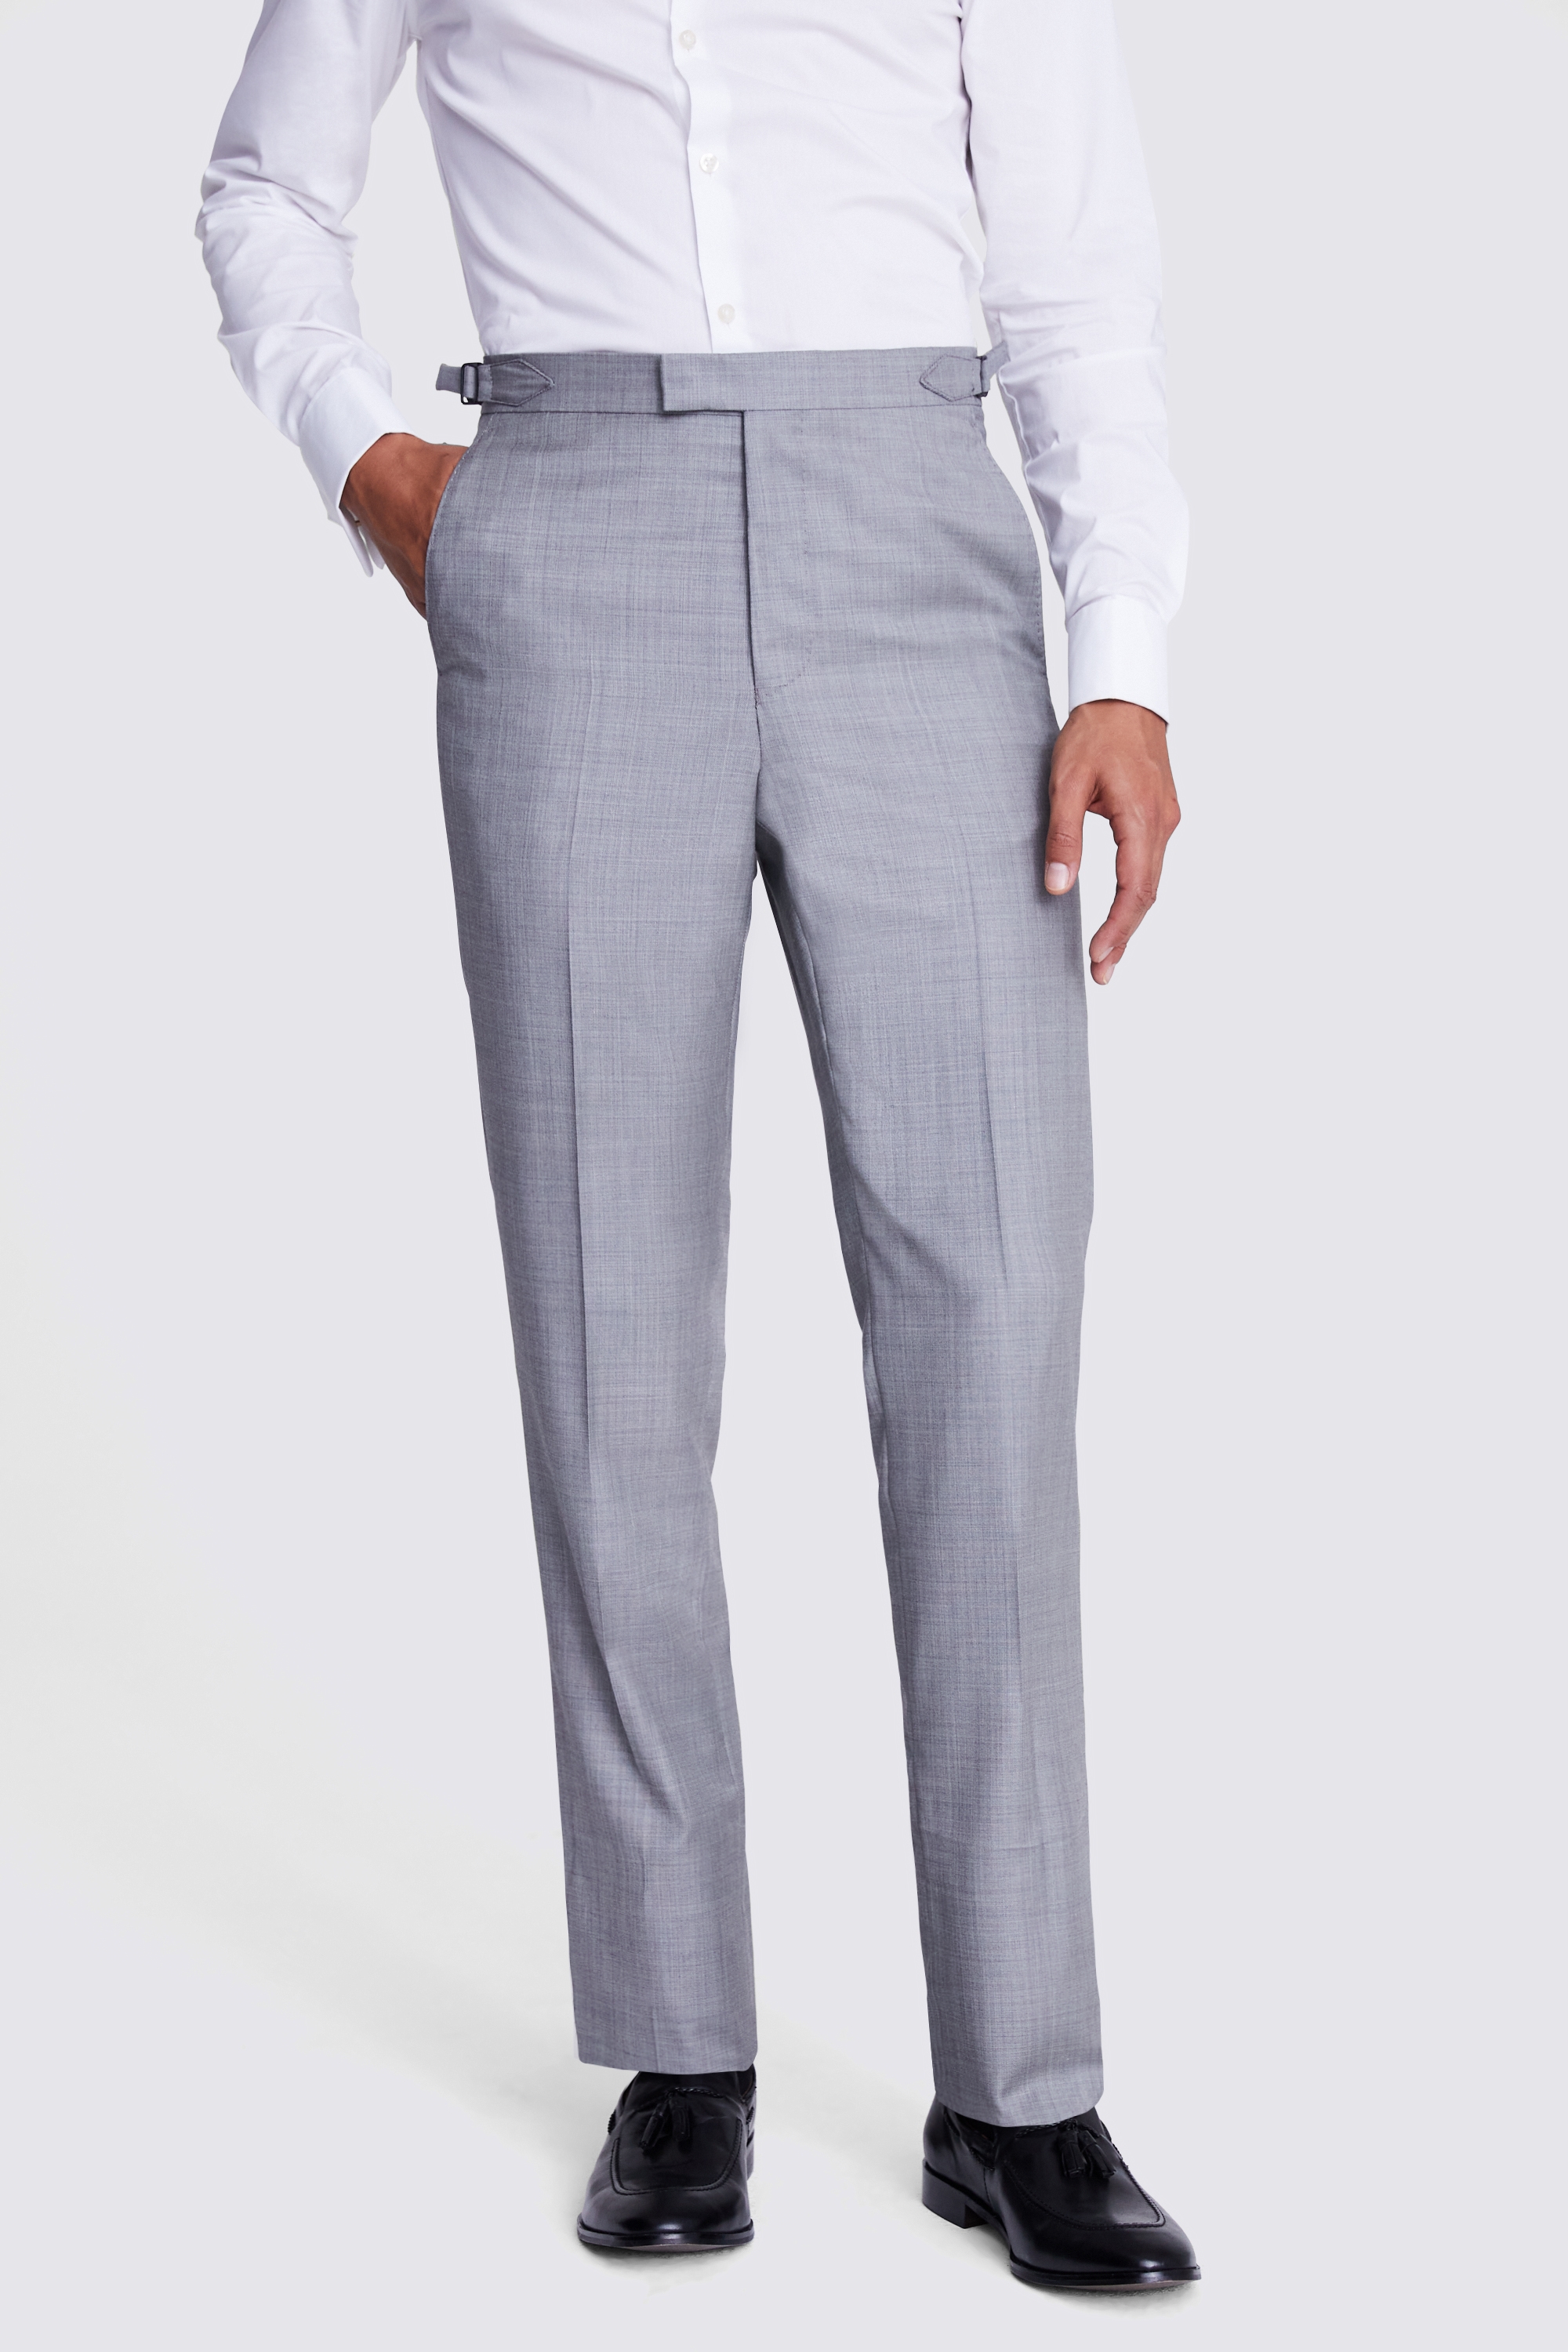 Tailored Fit Grey Sharkskin Trousers | Buy Online at Moss